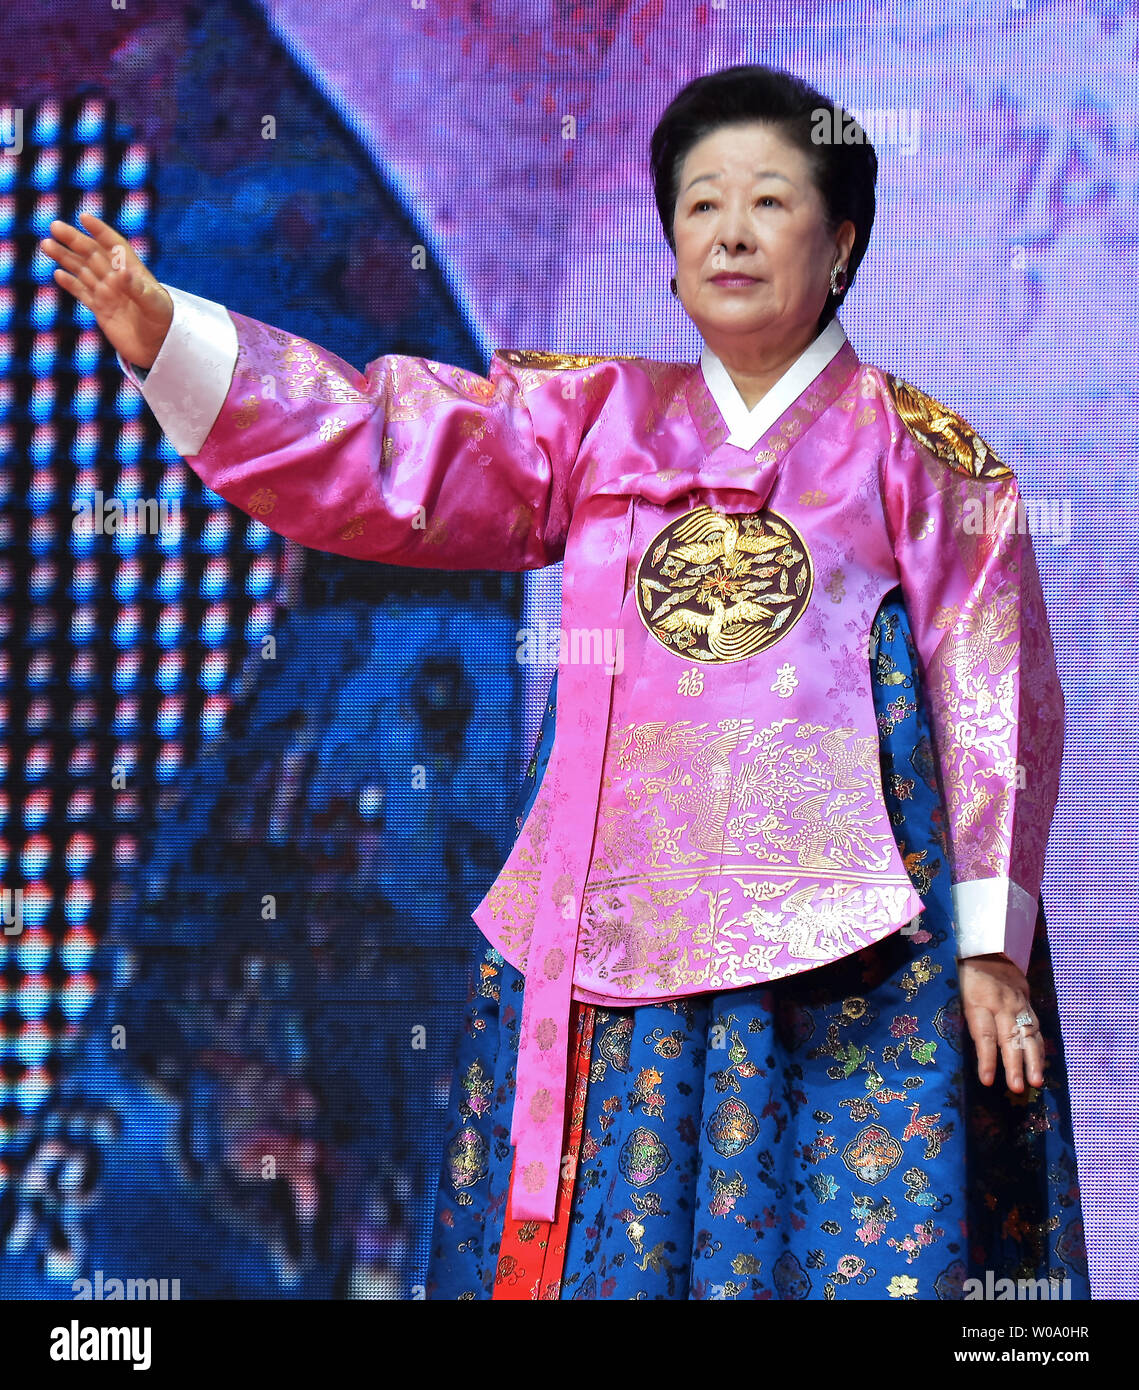 Hak-Ja Han, wife of late Unification Church founder Sun Myung Moon attends a Blessing Ceremony of the Family Federation for World Peace and Unification at the CheongShim Peace World Center in Gapyeong, South Korea, on February 20, 2016.     Photo by keizo Mori Stock Photo